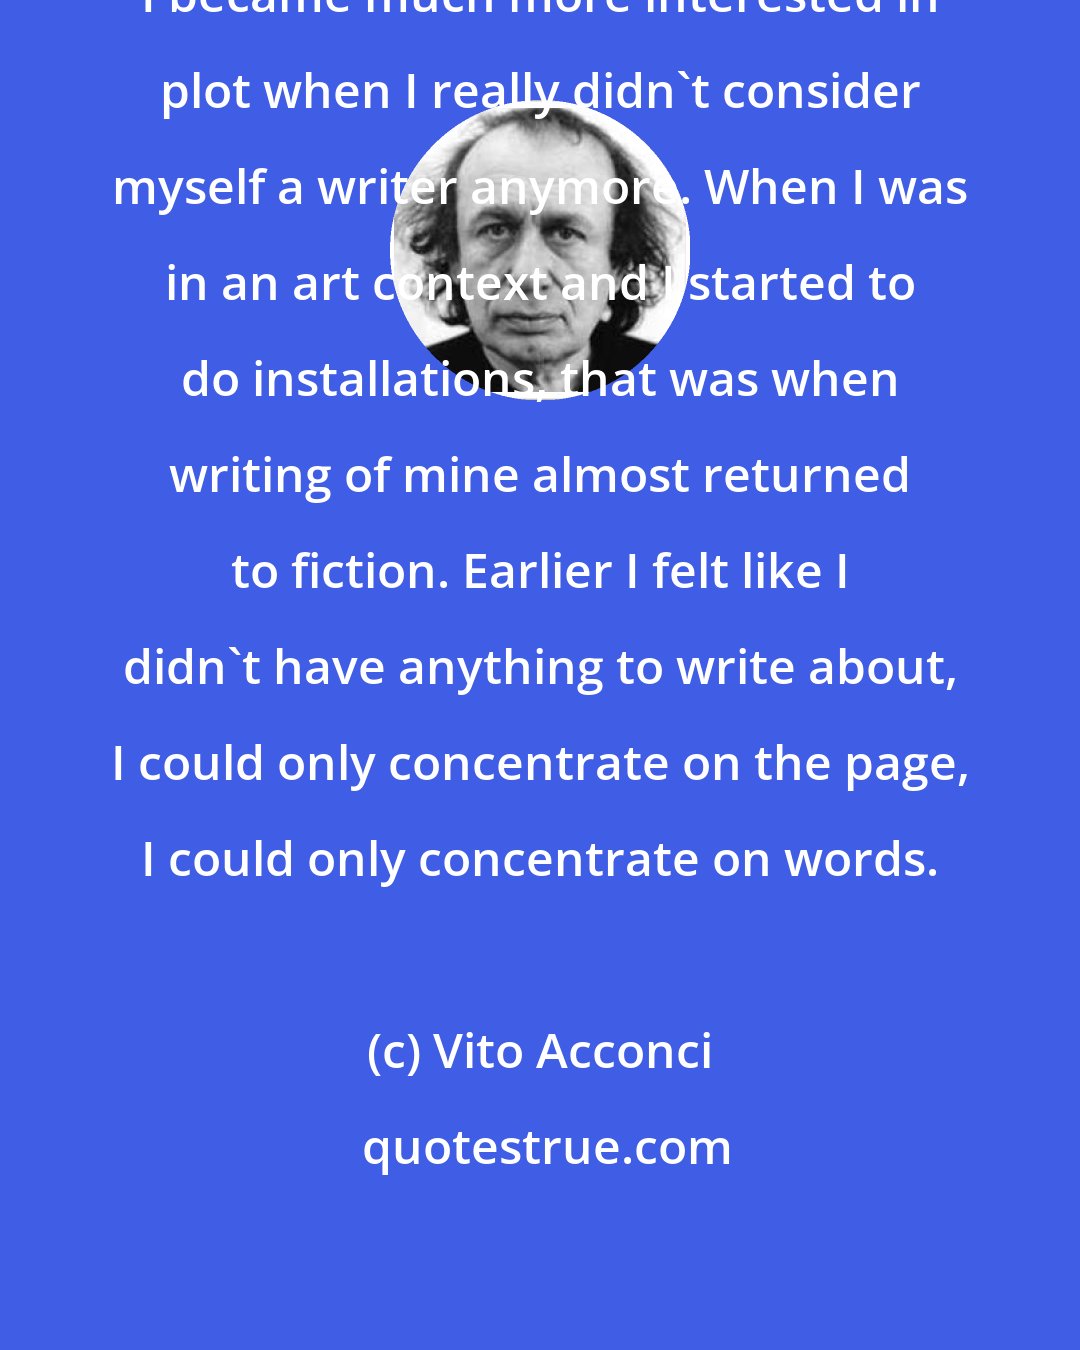 Vito Acconci: I became much more interested in plot when I really didn't consider myself a writer anymore. When I was in an art context and I started to do installations, that was when writing of mine almost returned to fiction. Earlier I felt like I didn't have anything to write about, I could only concentrate on the page, I could only concentrate on words.